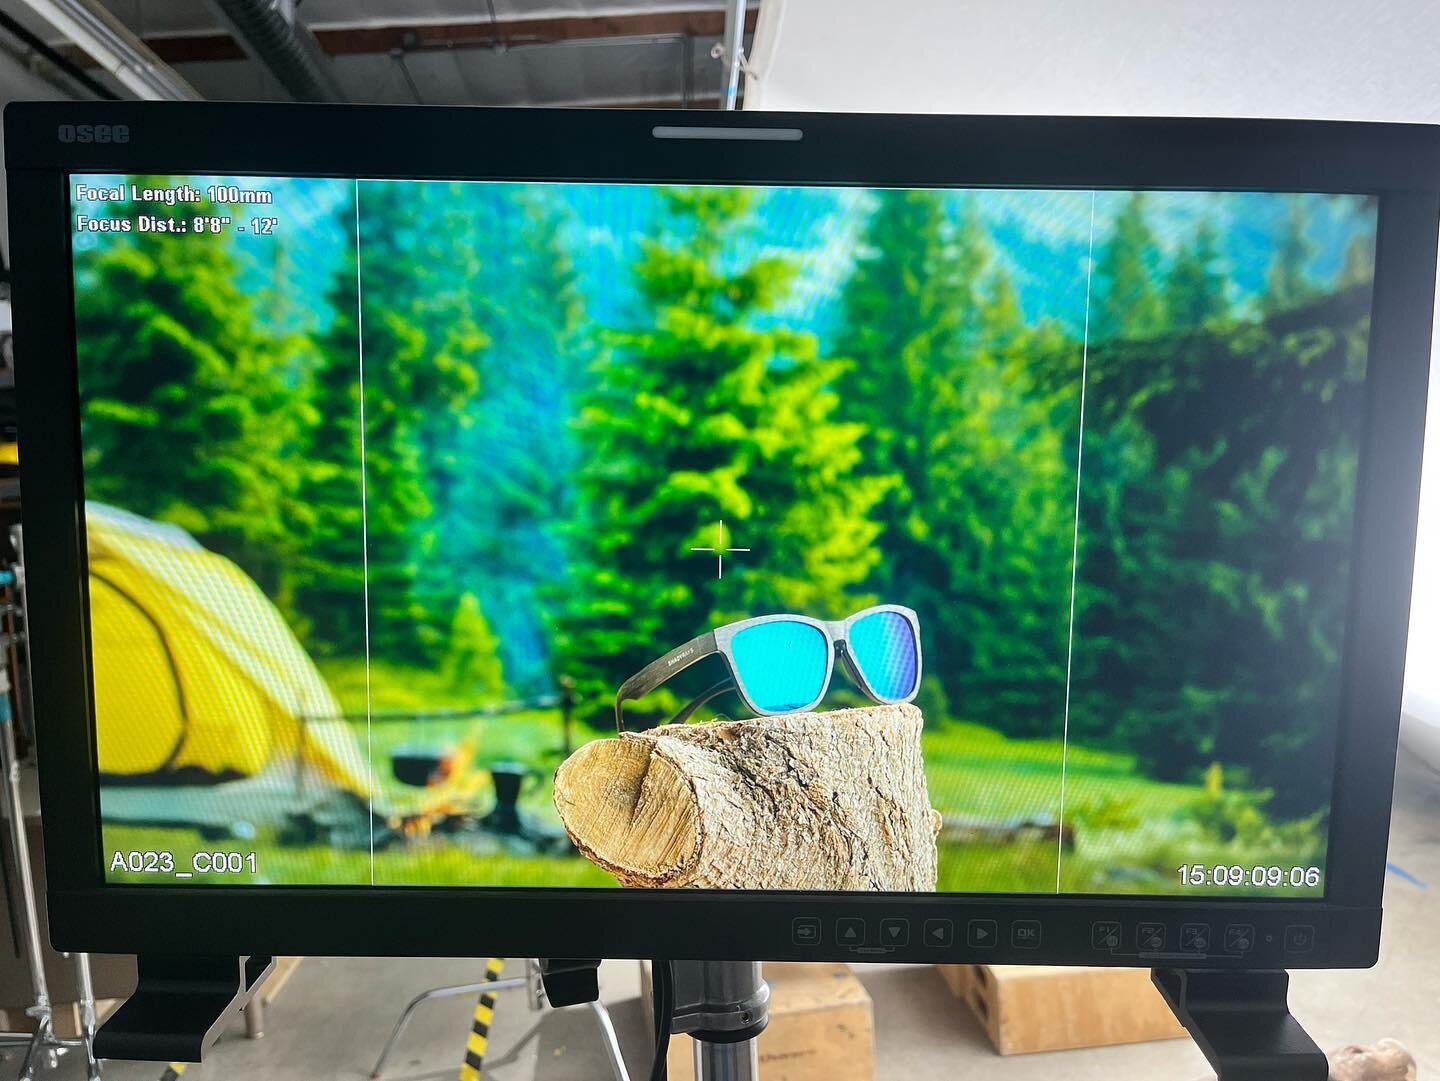 When you can&rsquo;t film in the woods, bring the woods to you. Thank you LED TV
.
.
.
.
#moviemagic
#production #productshots #sdfilmmak